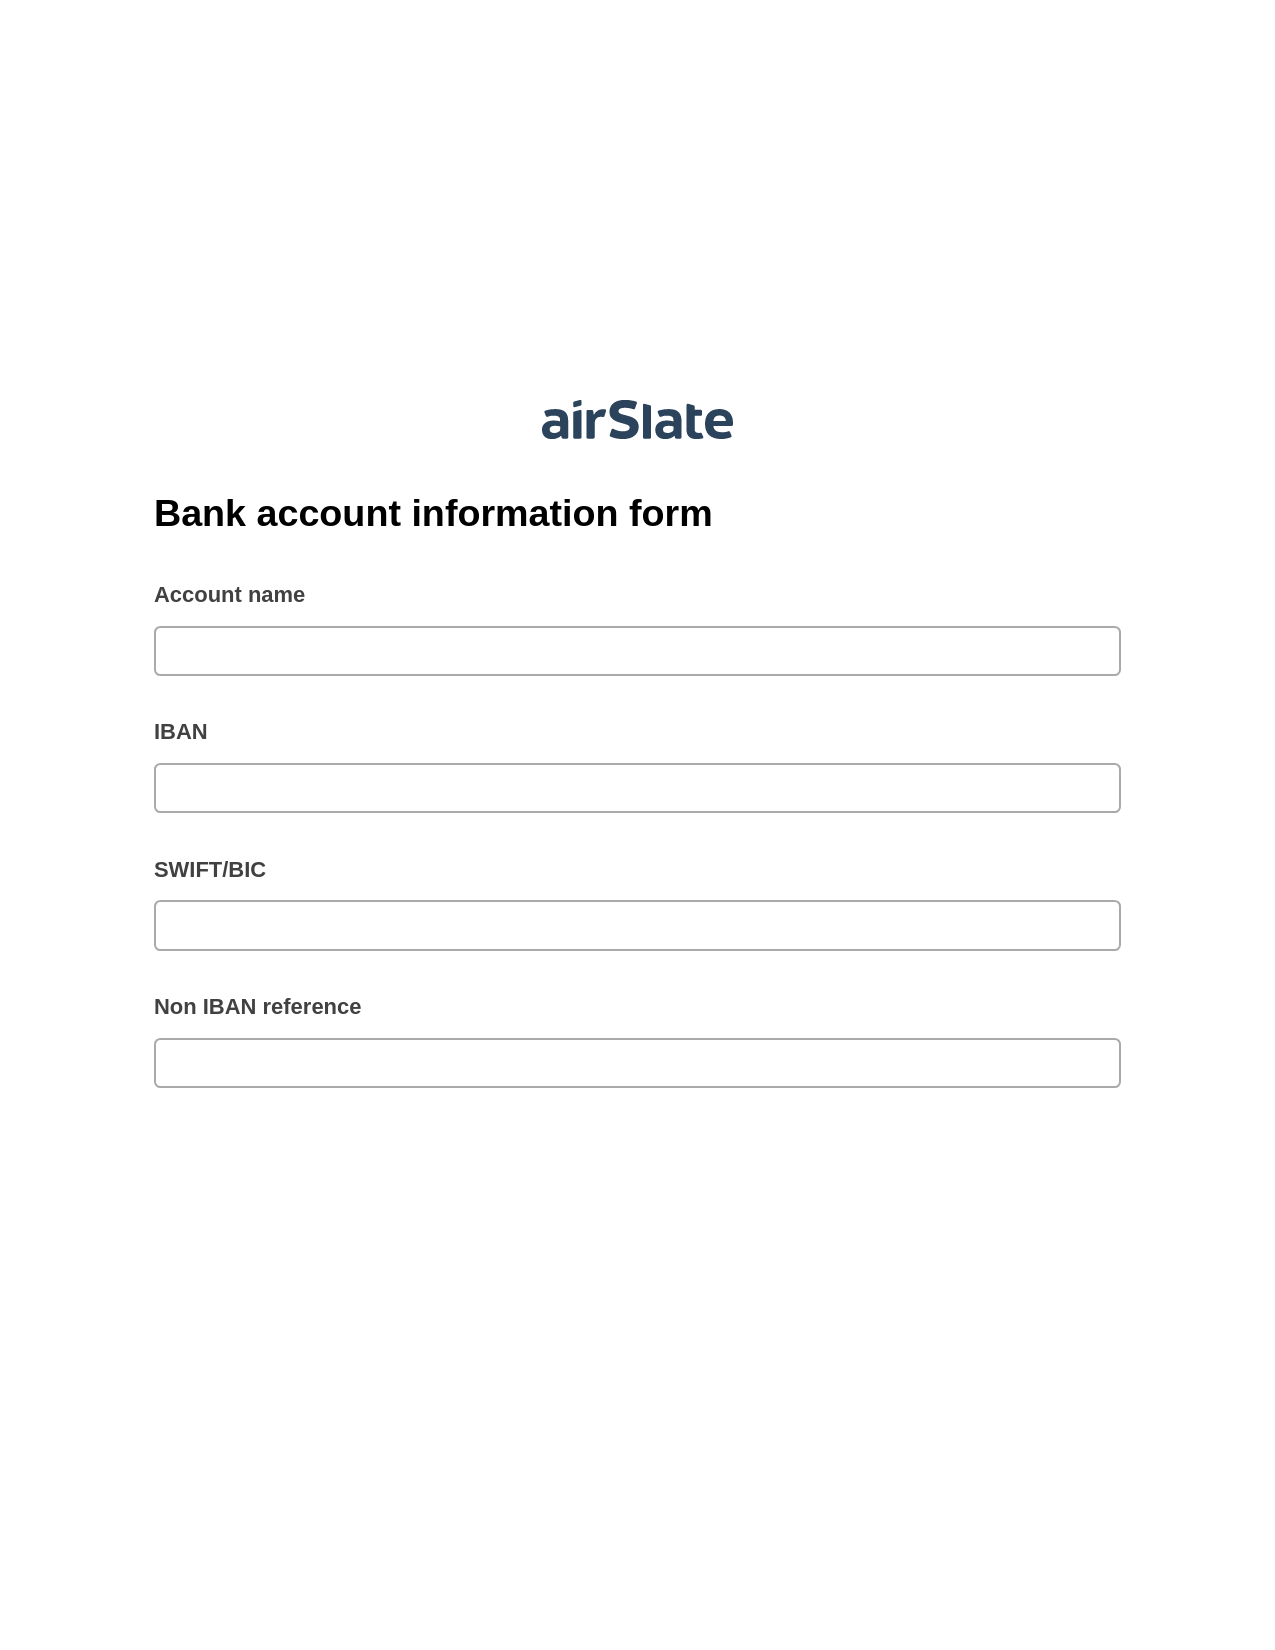 Multirole Bank account information form Pre-fill from MySQL Dropdown Options Bot, Create Salesforce Record Bot, Post-finish Document Bot